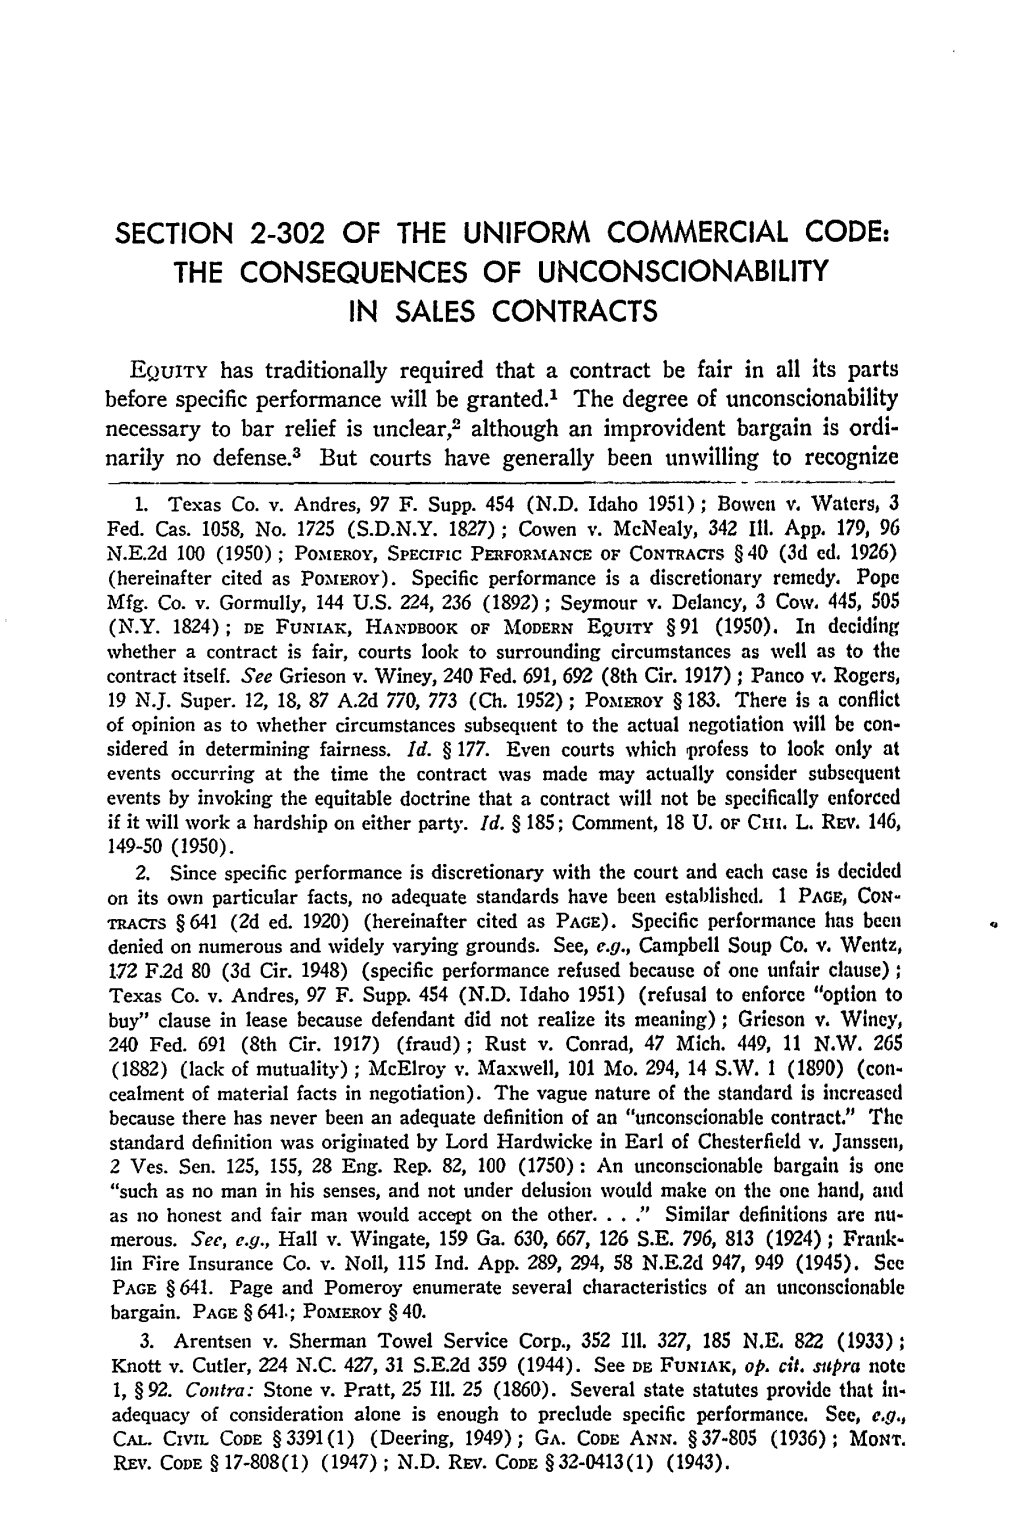 Section 2-302 of the Uniform Commercial Code: the Consequences of Unconscionability in Sales Contracts